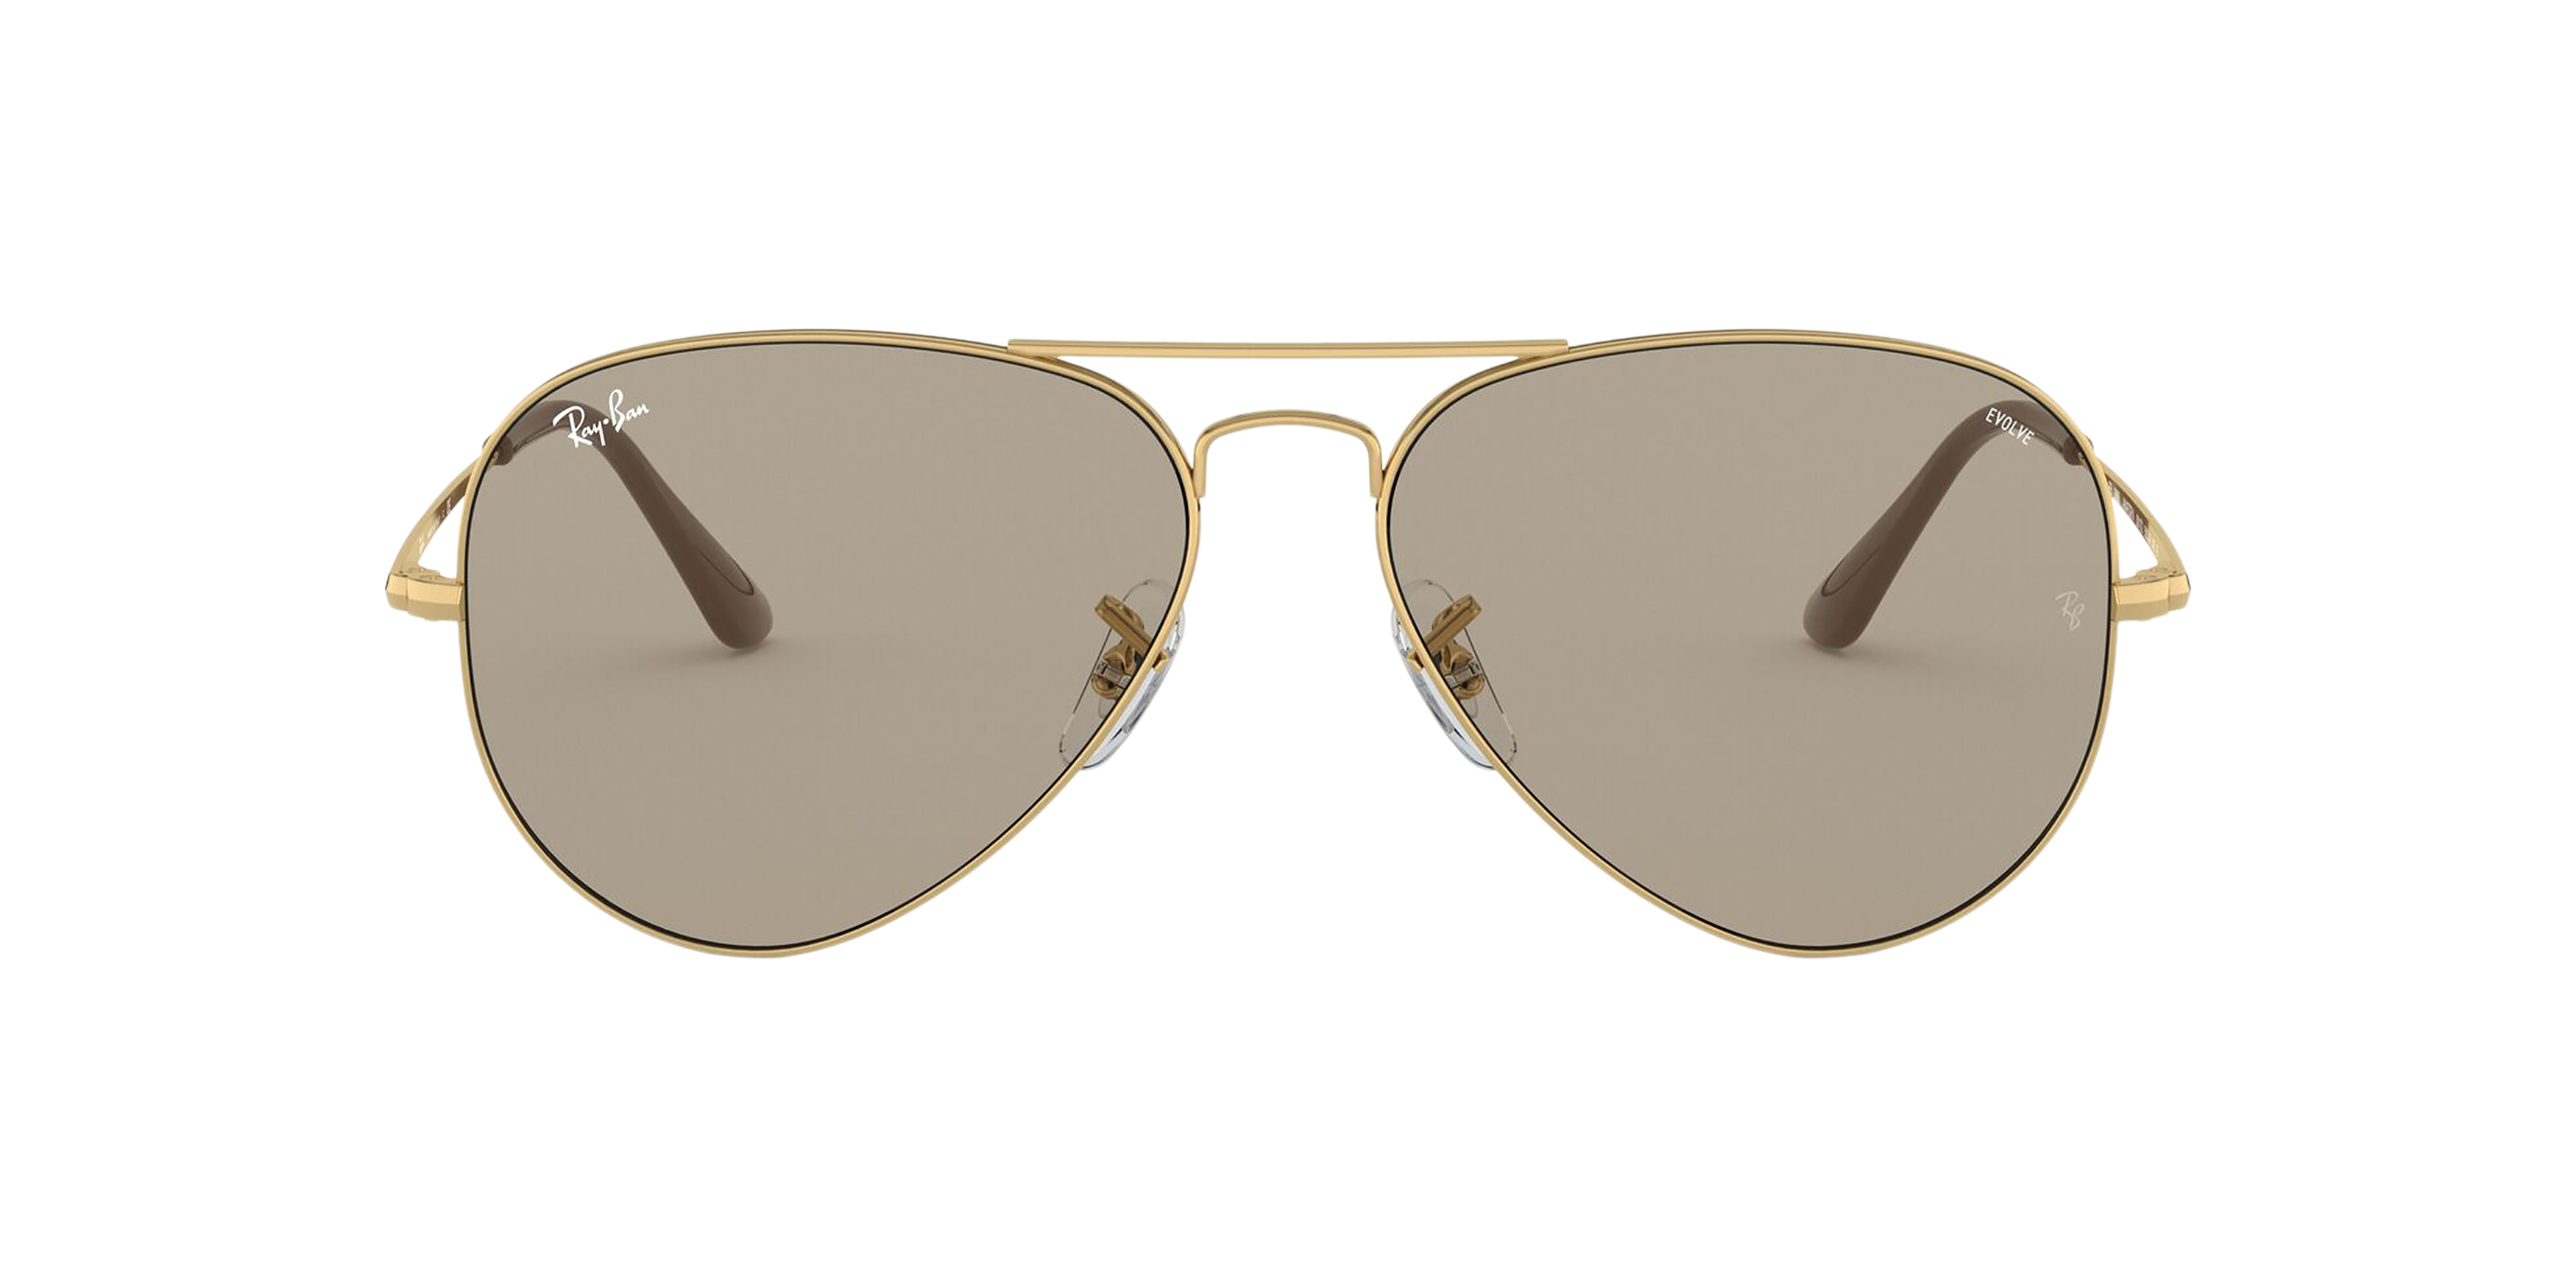 [products.image.front] Ray-Ban Solid Evolve RB3689 1/T2